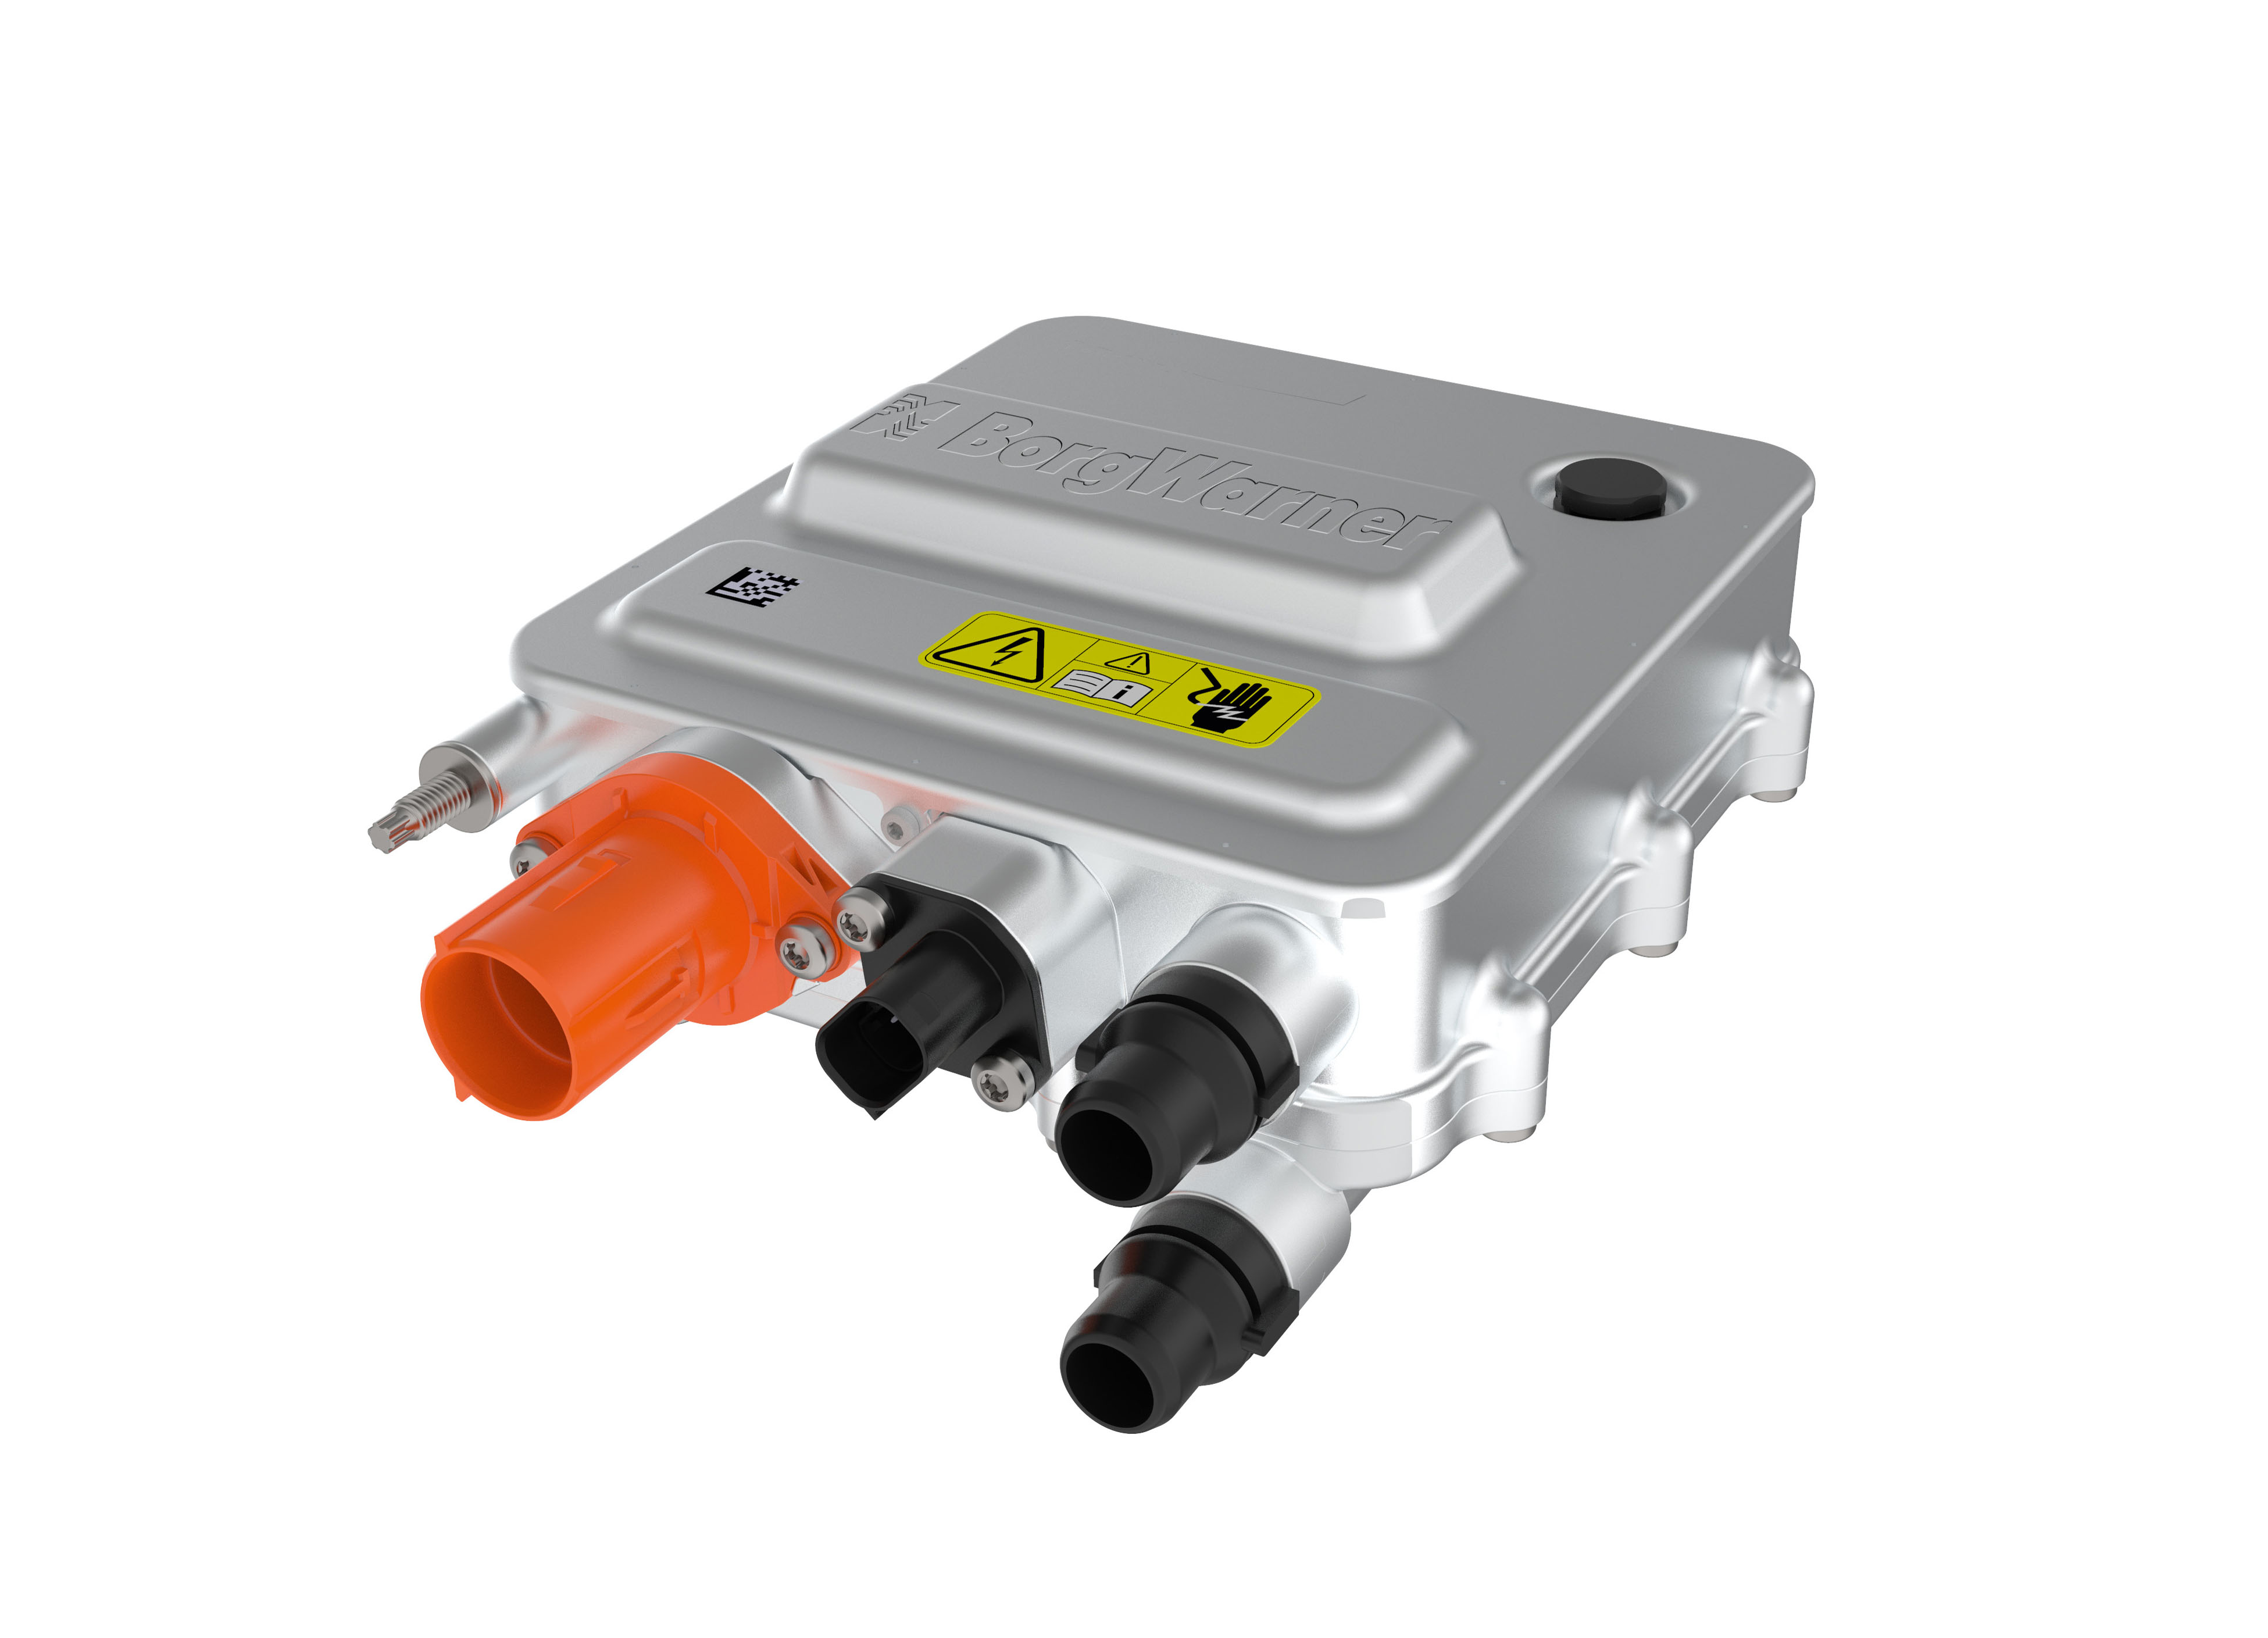 Major OEMs on three continents choose BorgWarner’s leading-edge coolant heaters for the latest hybrid and electric cars.